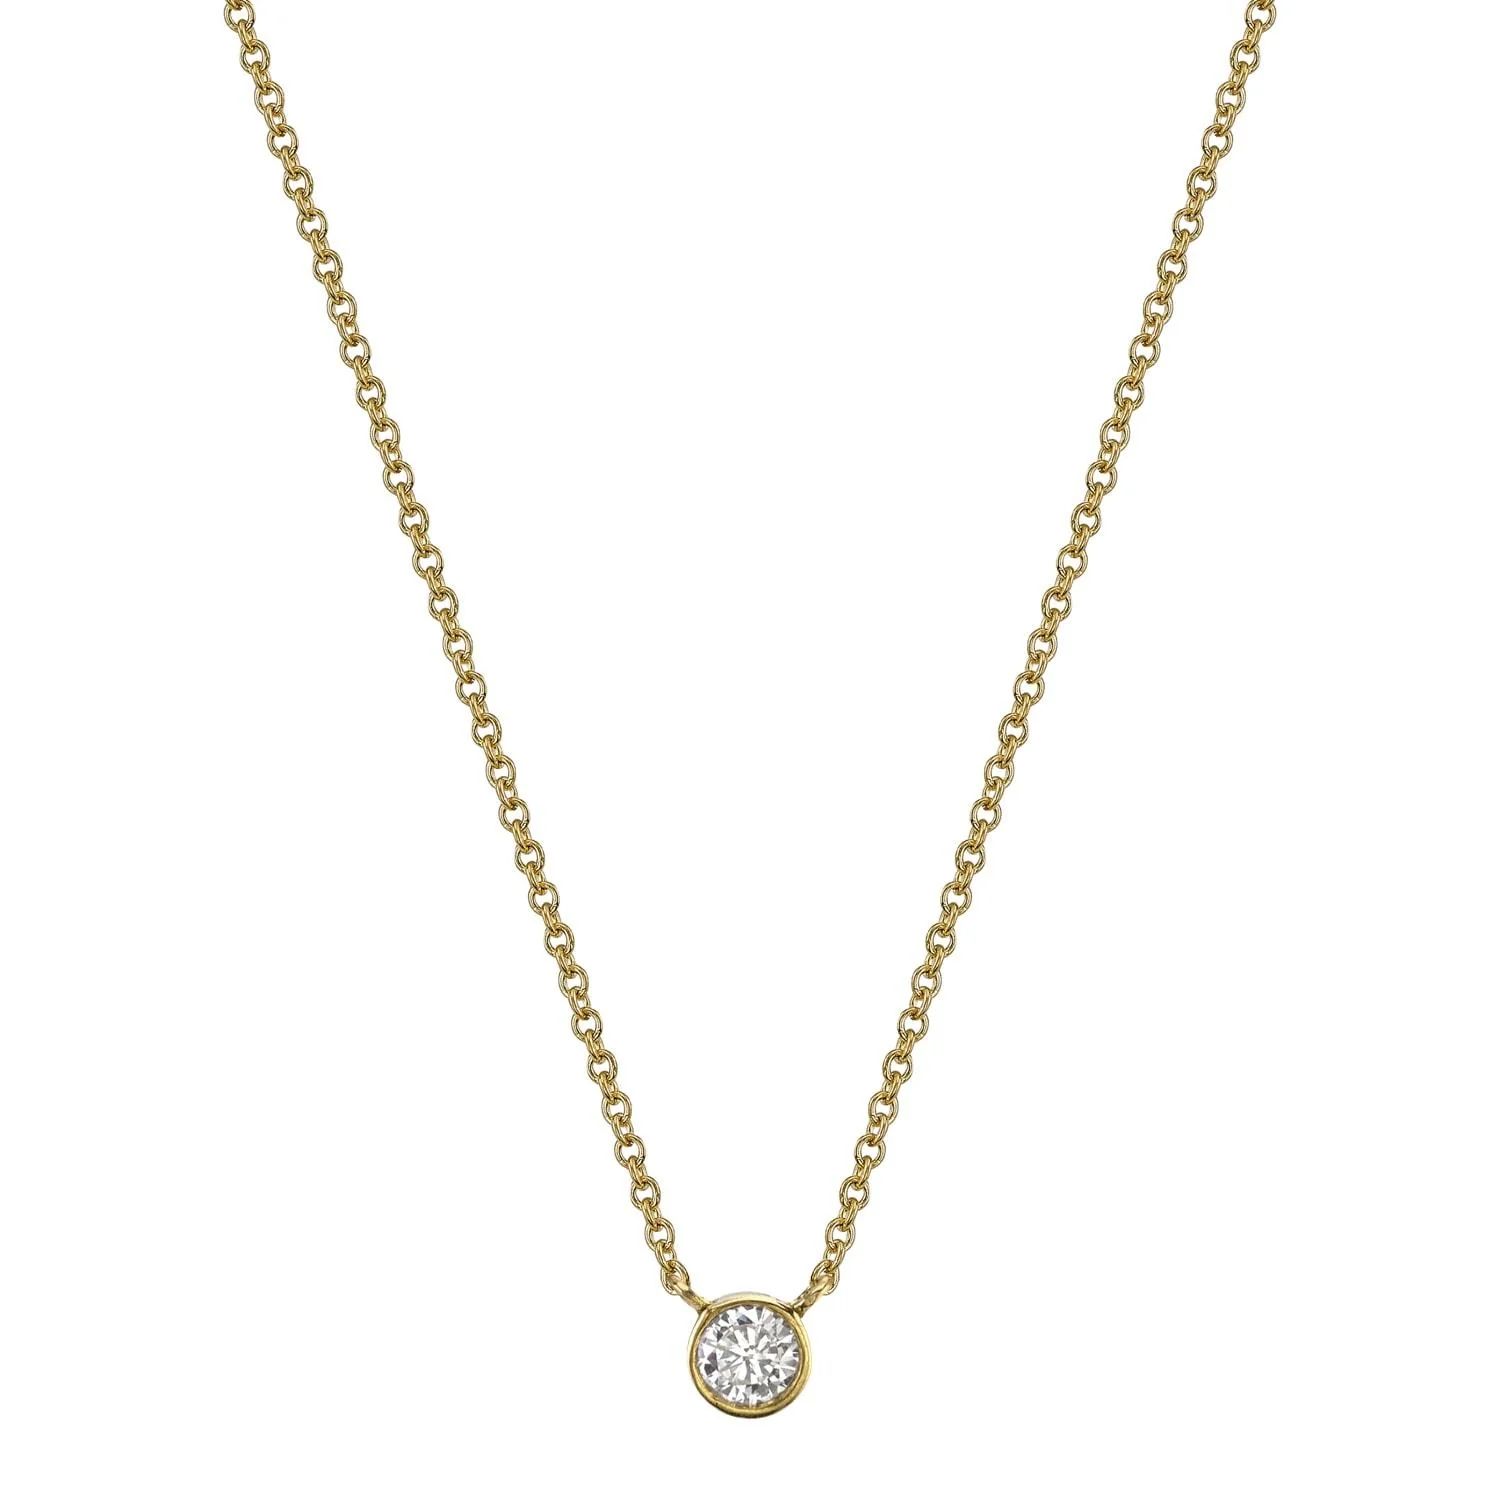 DIAMOND SOLITAIRE NECKLACE | Starling Jewelry | Starling Jewelry